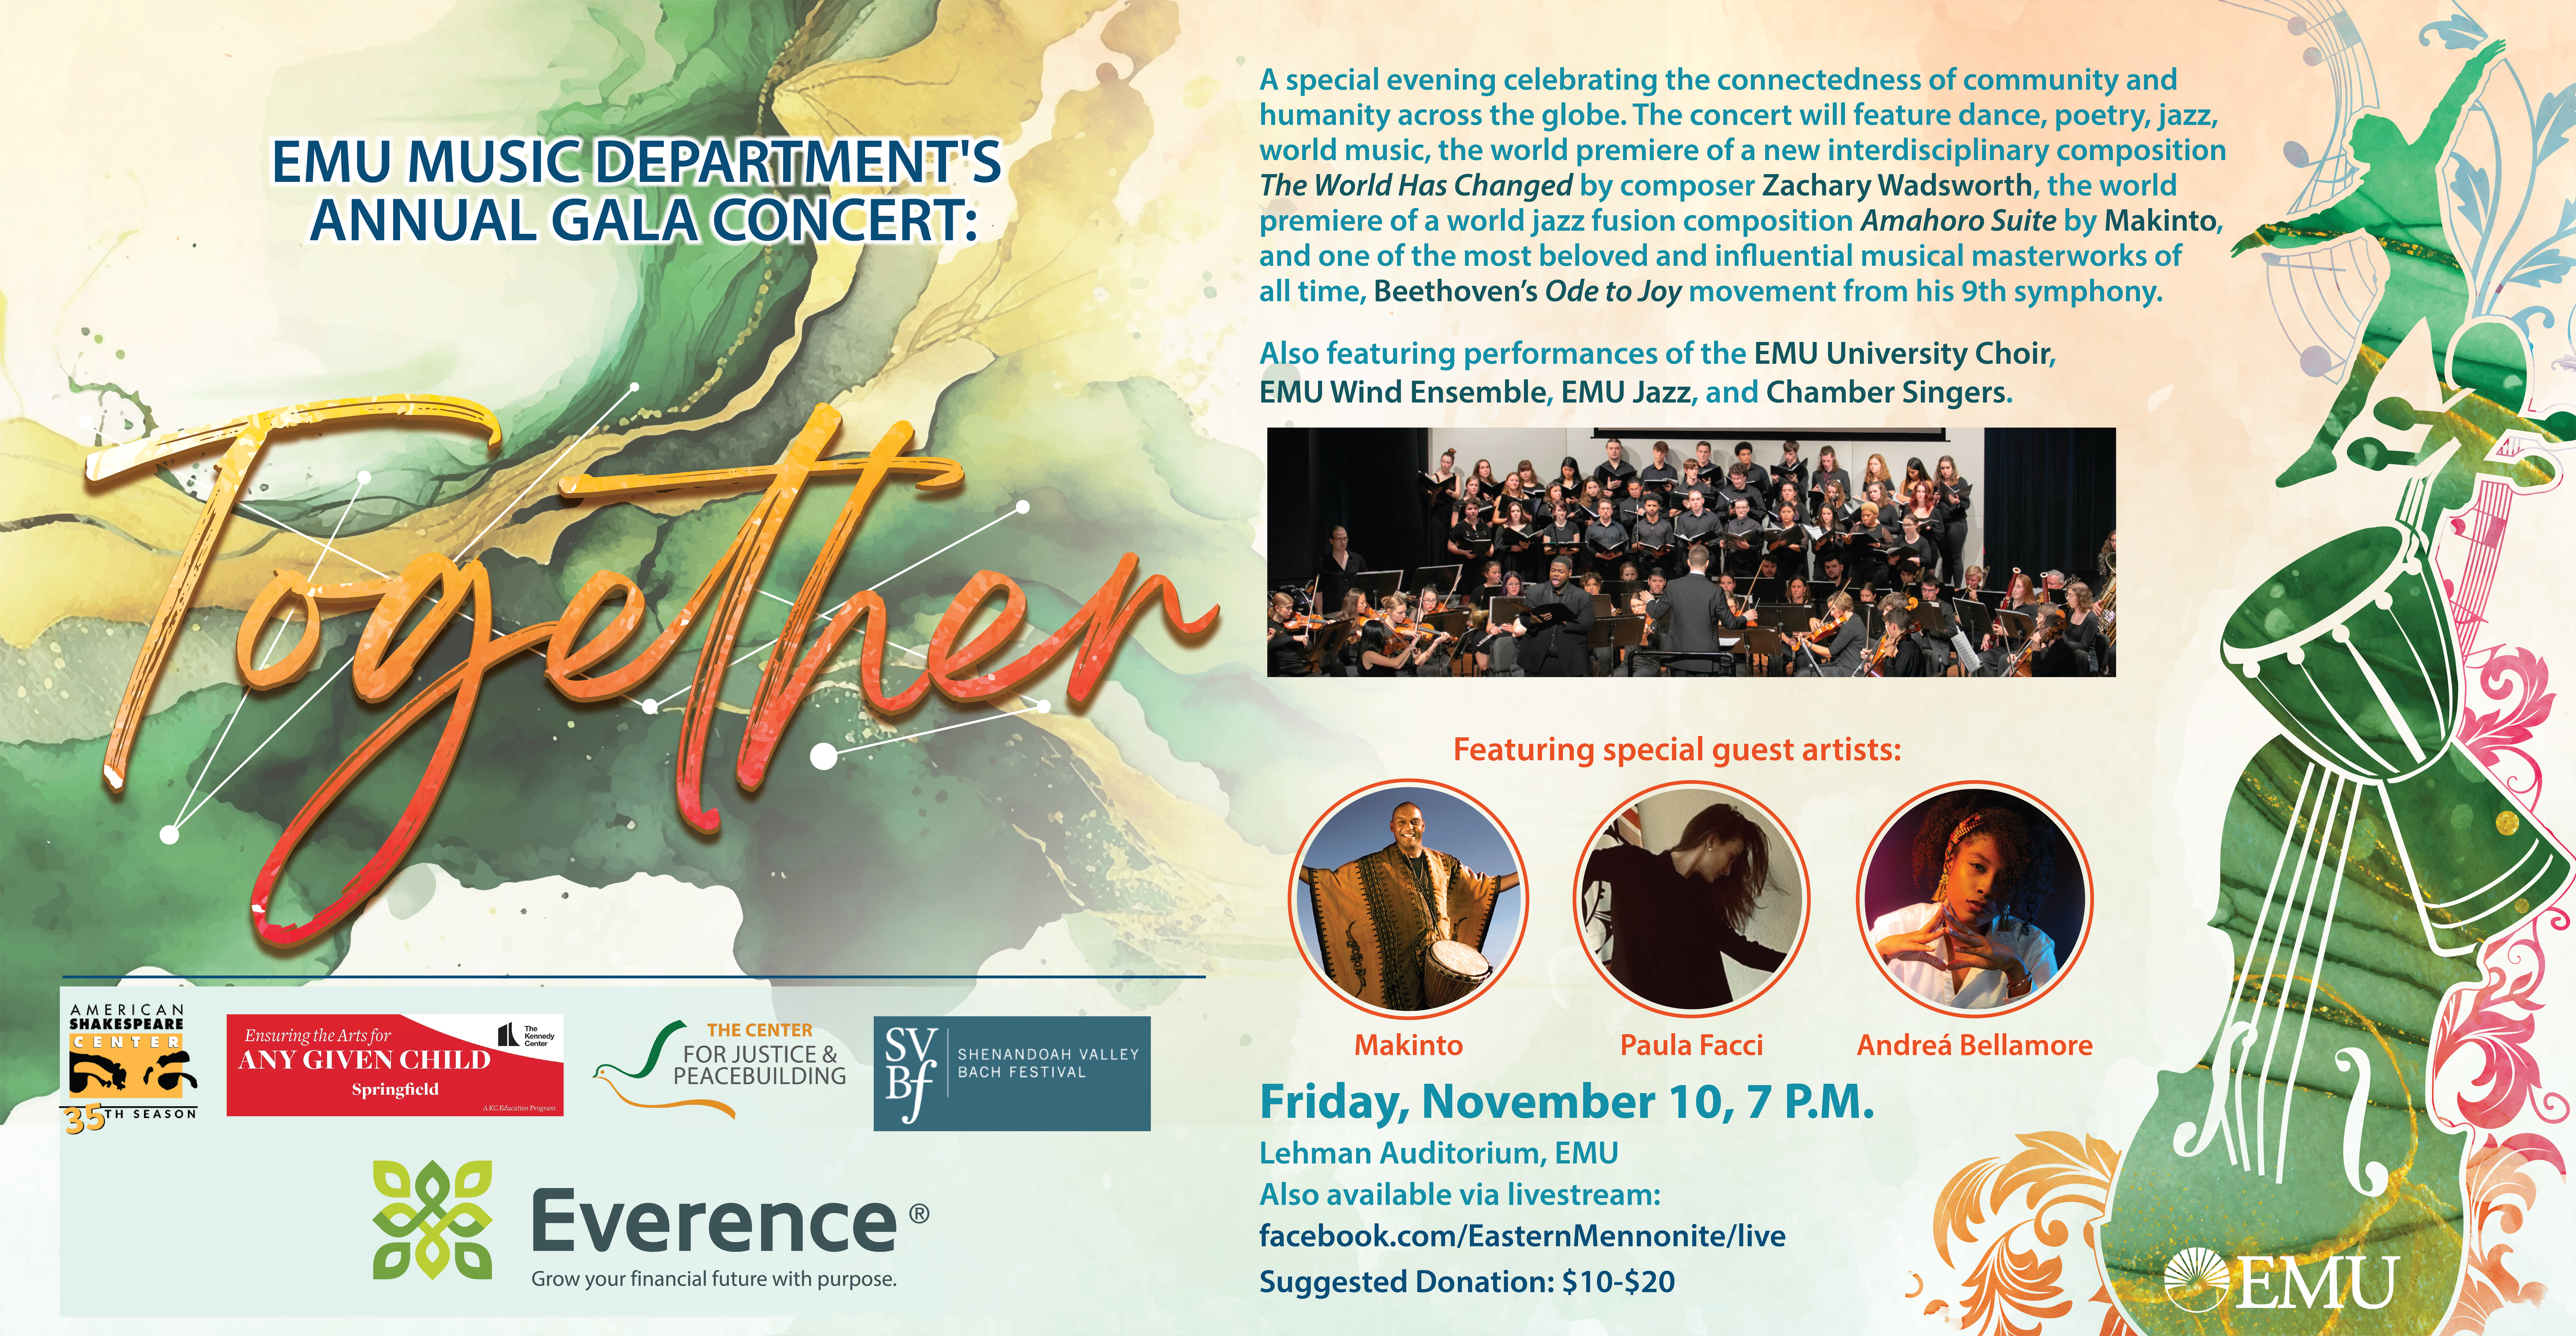 EMU MUSIC DEPARTMENT’S ANNUAL GALA CONCERT: TOGETHER